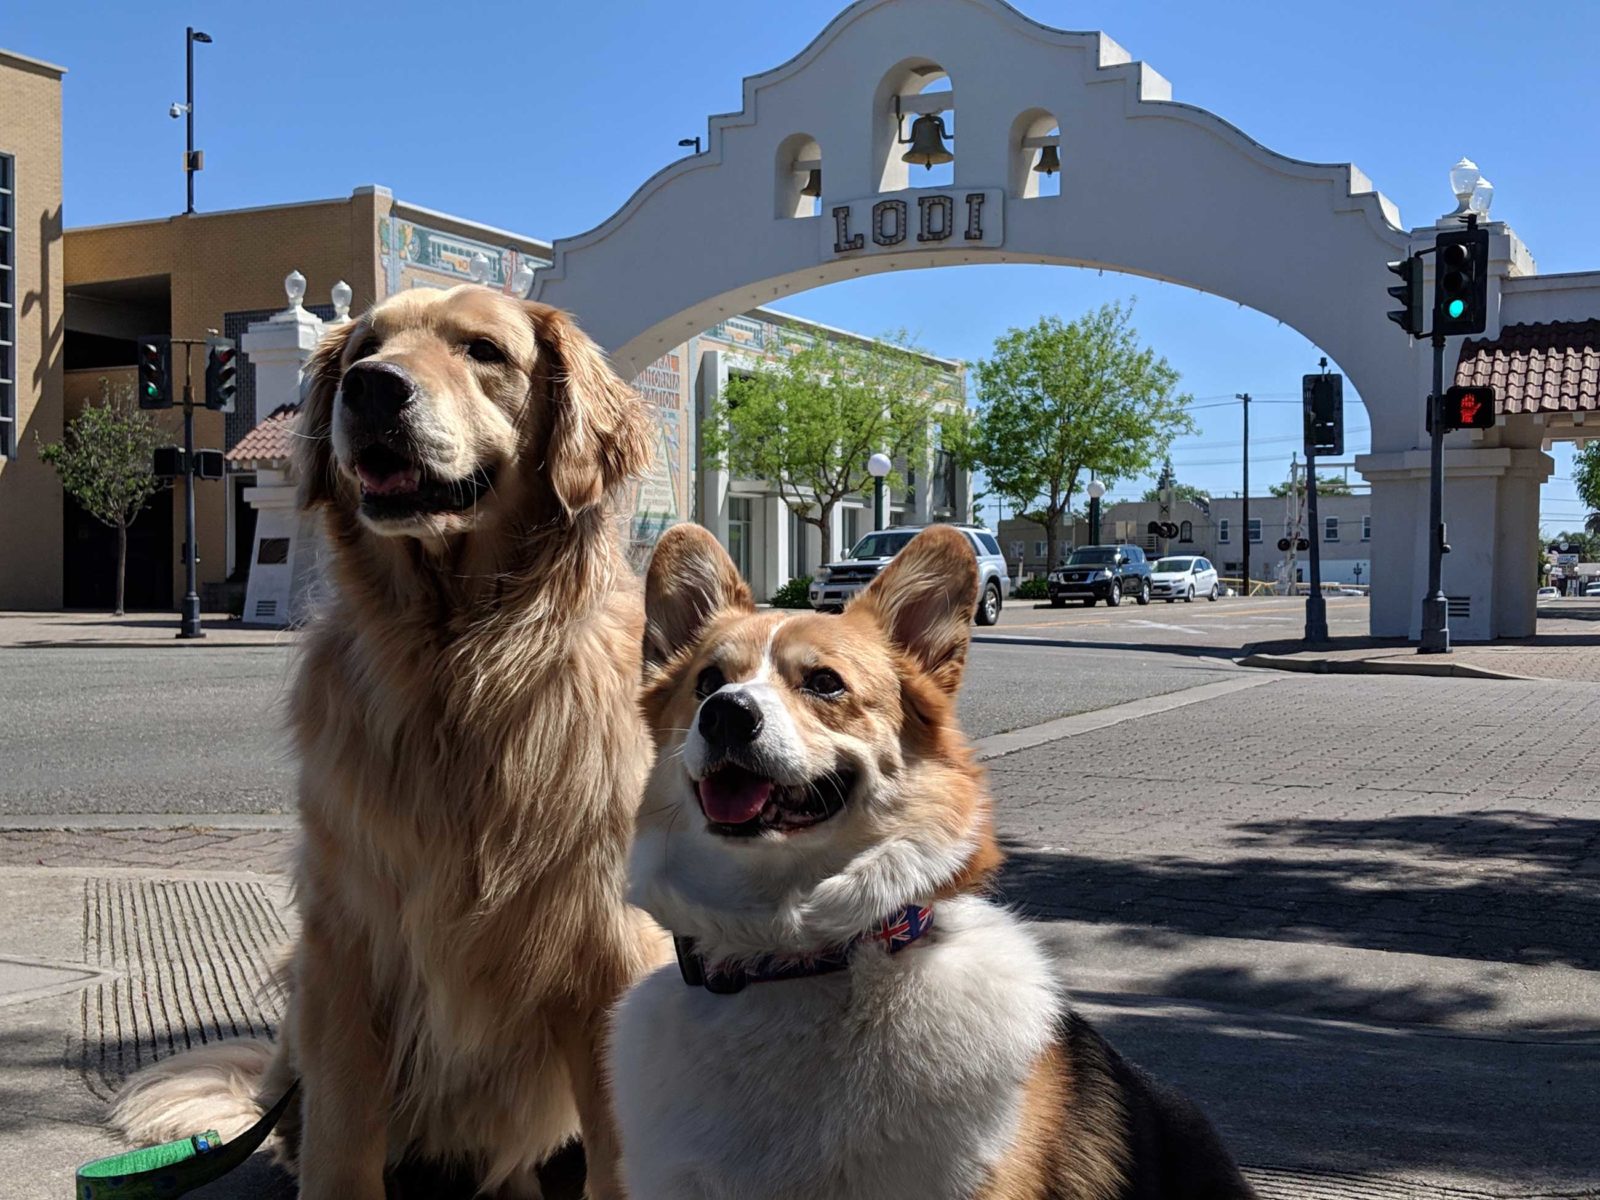 Dogs in front of Lodi sign